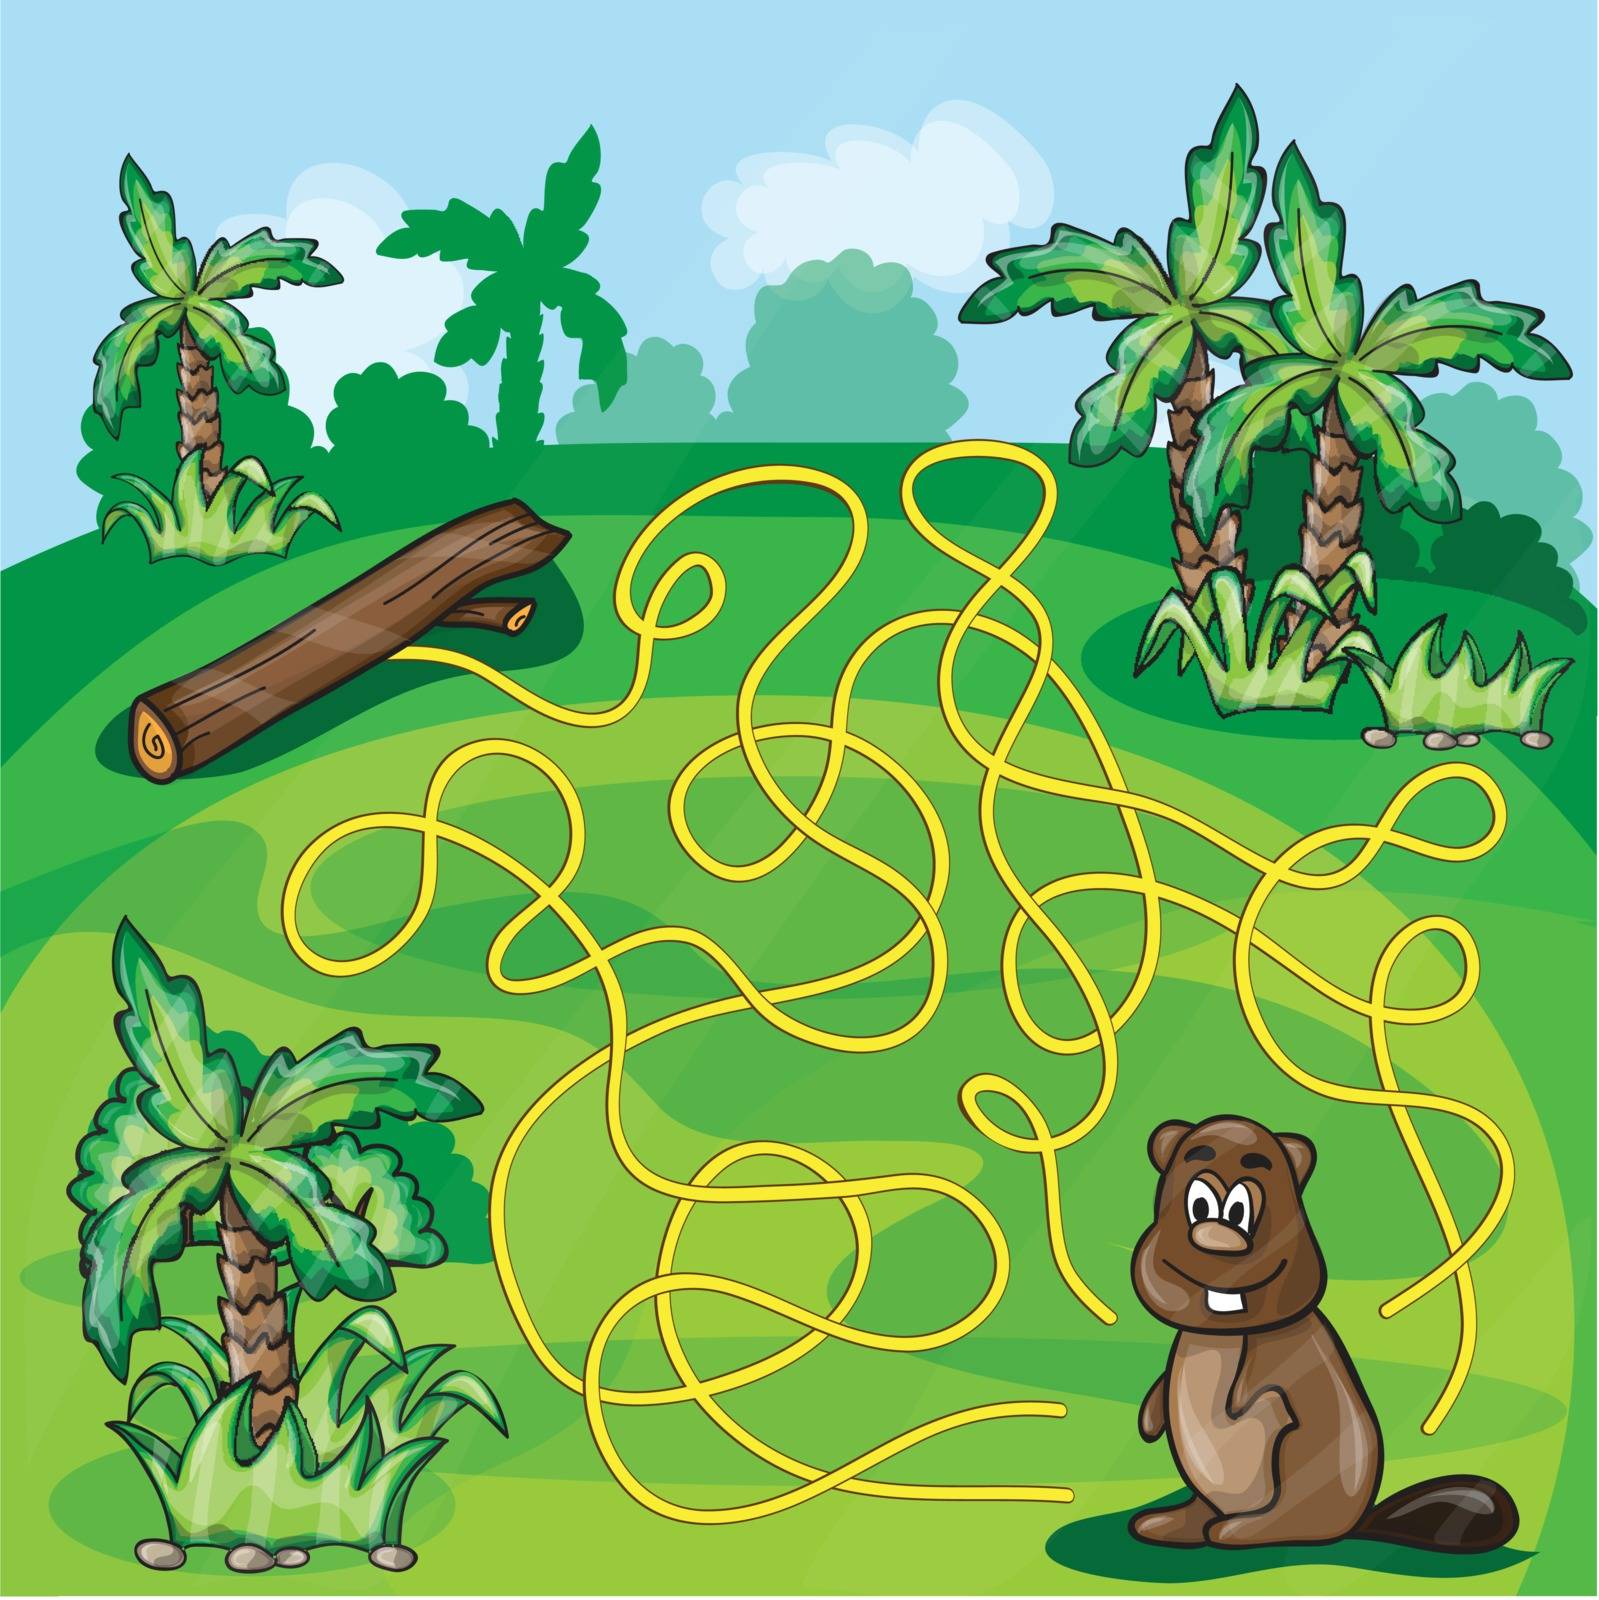 Labyrinth maze for kids - help the beaver find a way - game vector illustration